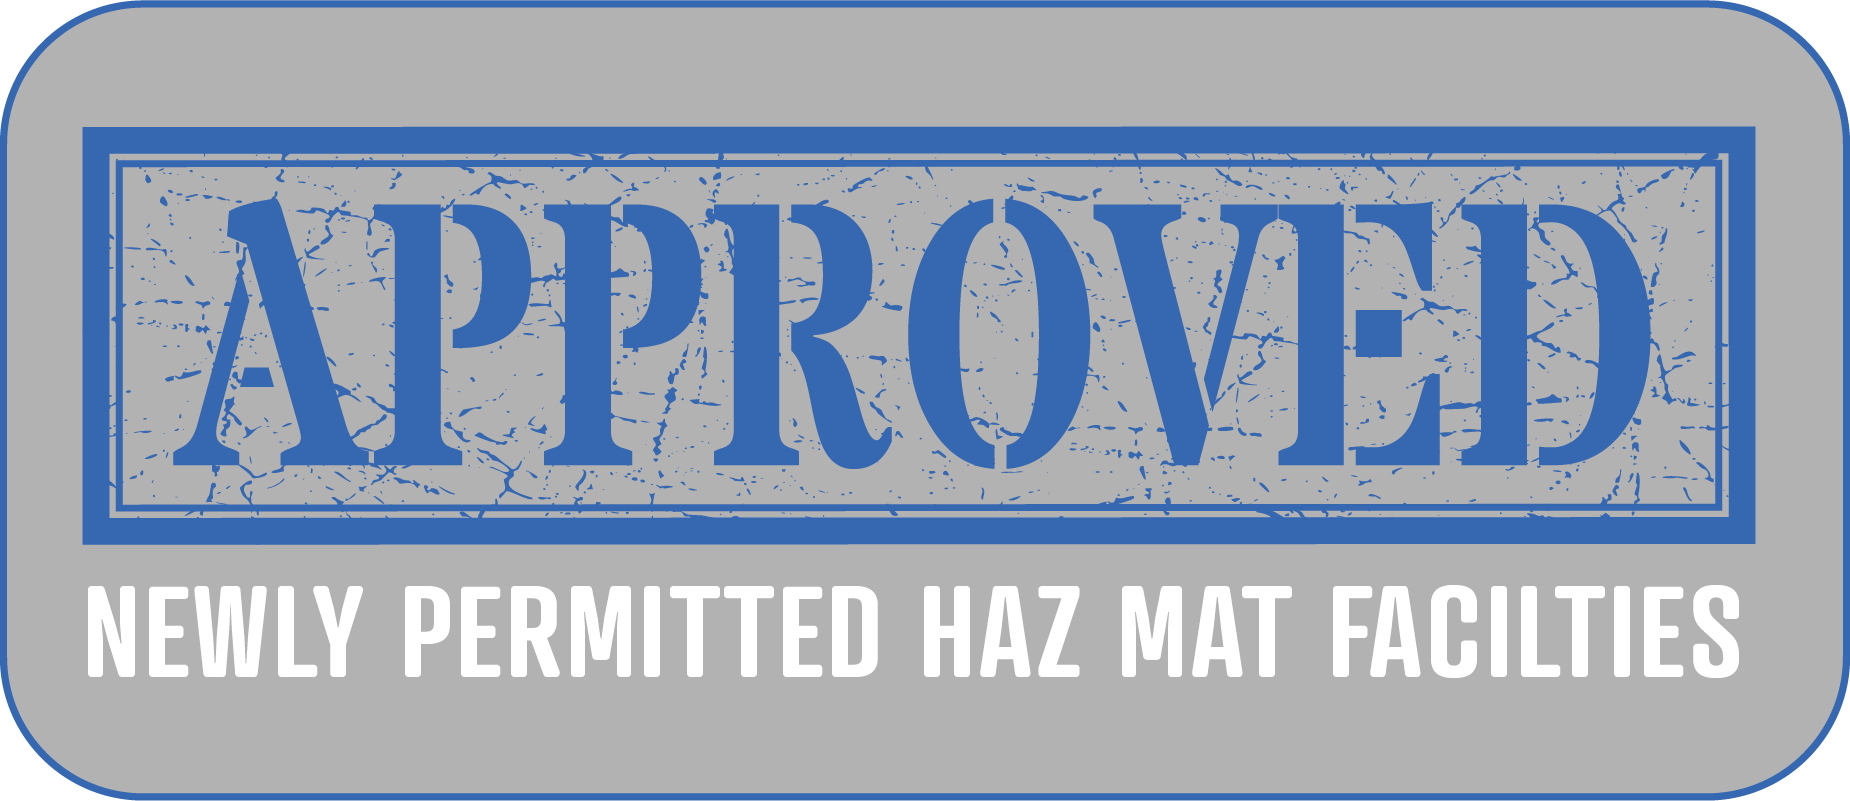 Approved Haz Mat Facilities